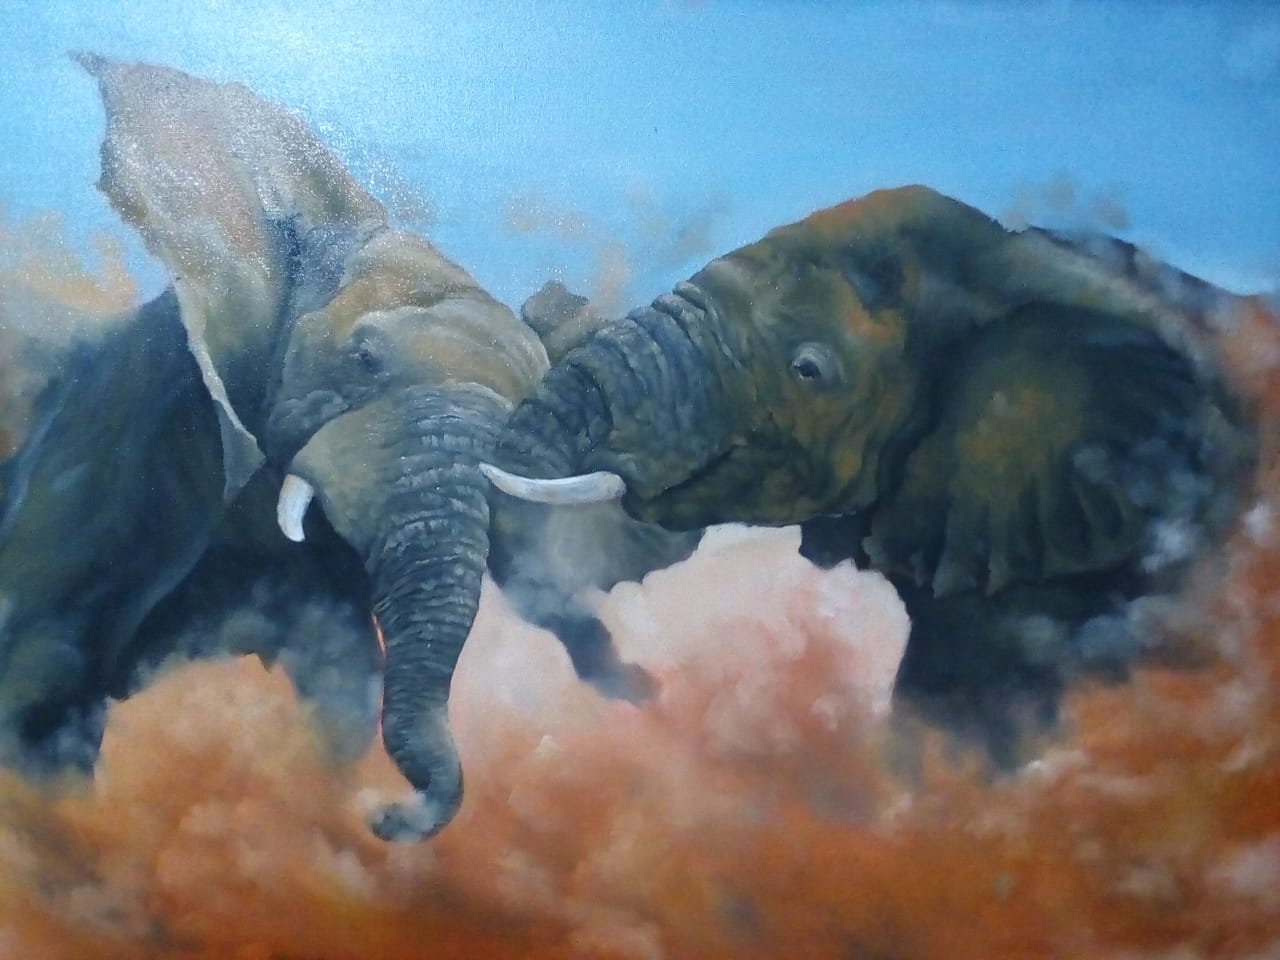 Realism Painting with Oil on Canvas "Elephant Fight" art by Jitender  Kumar